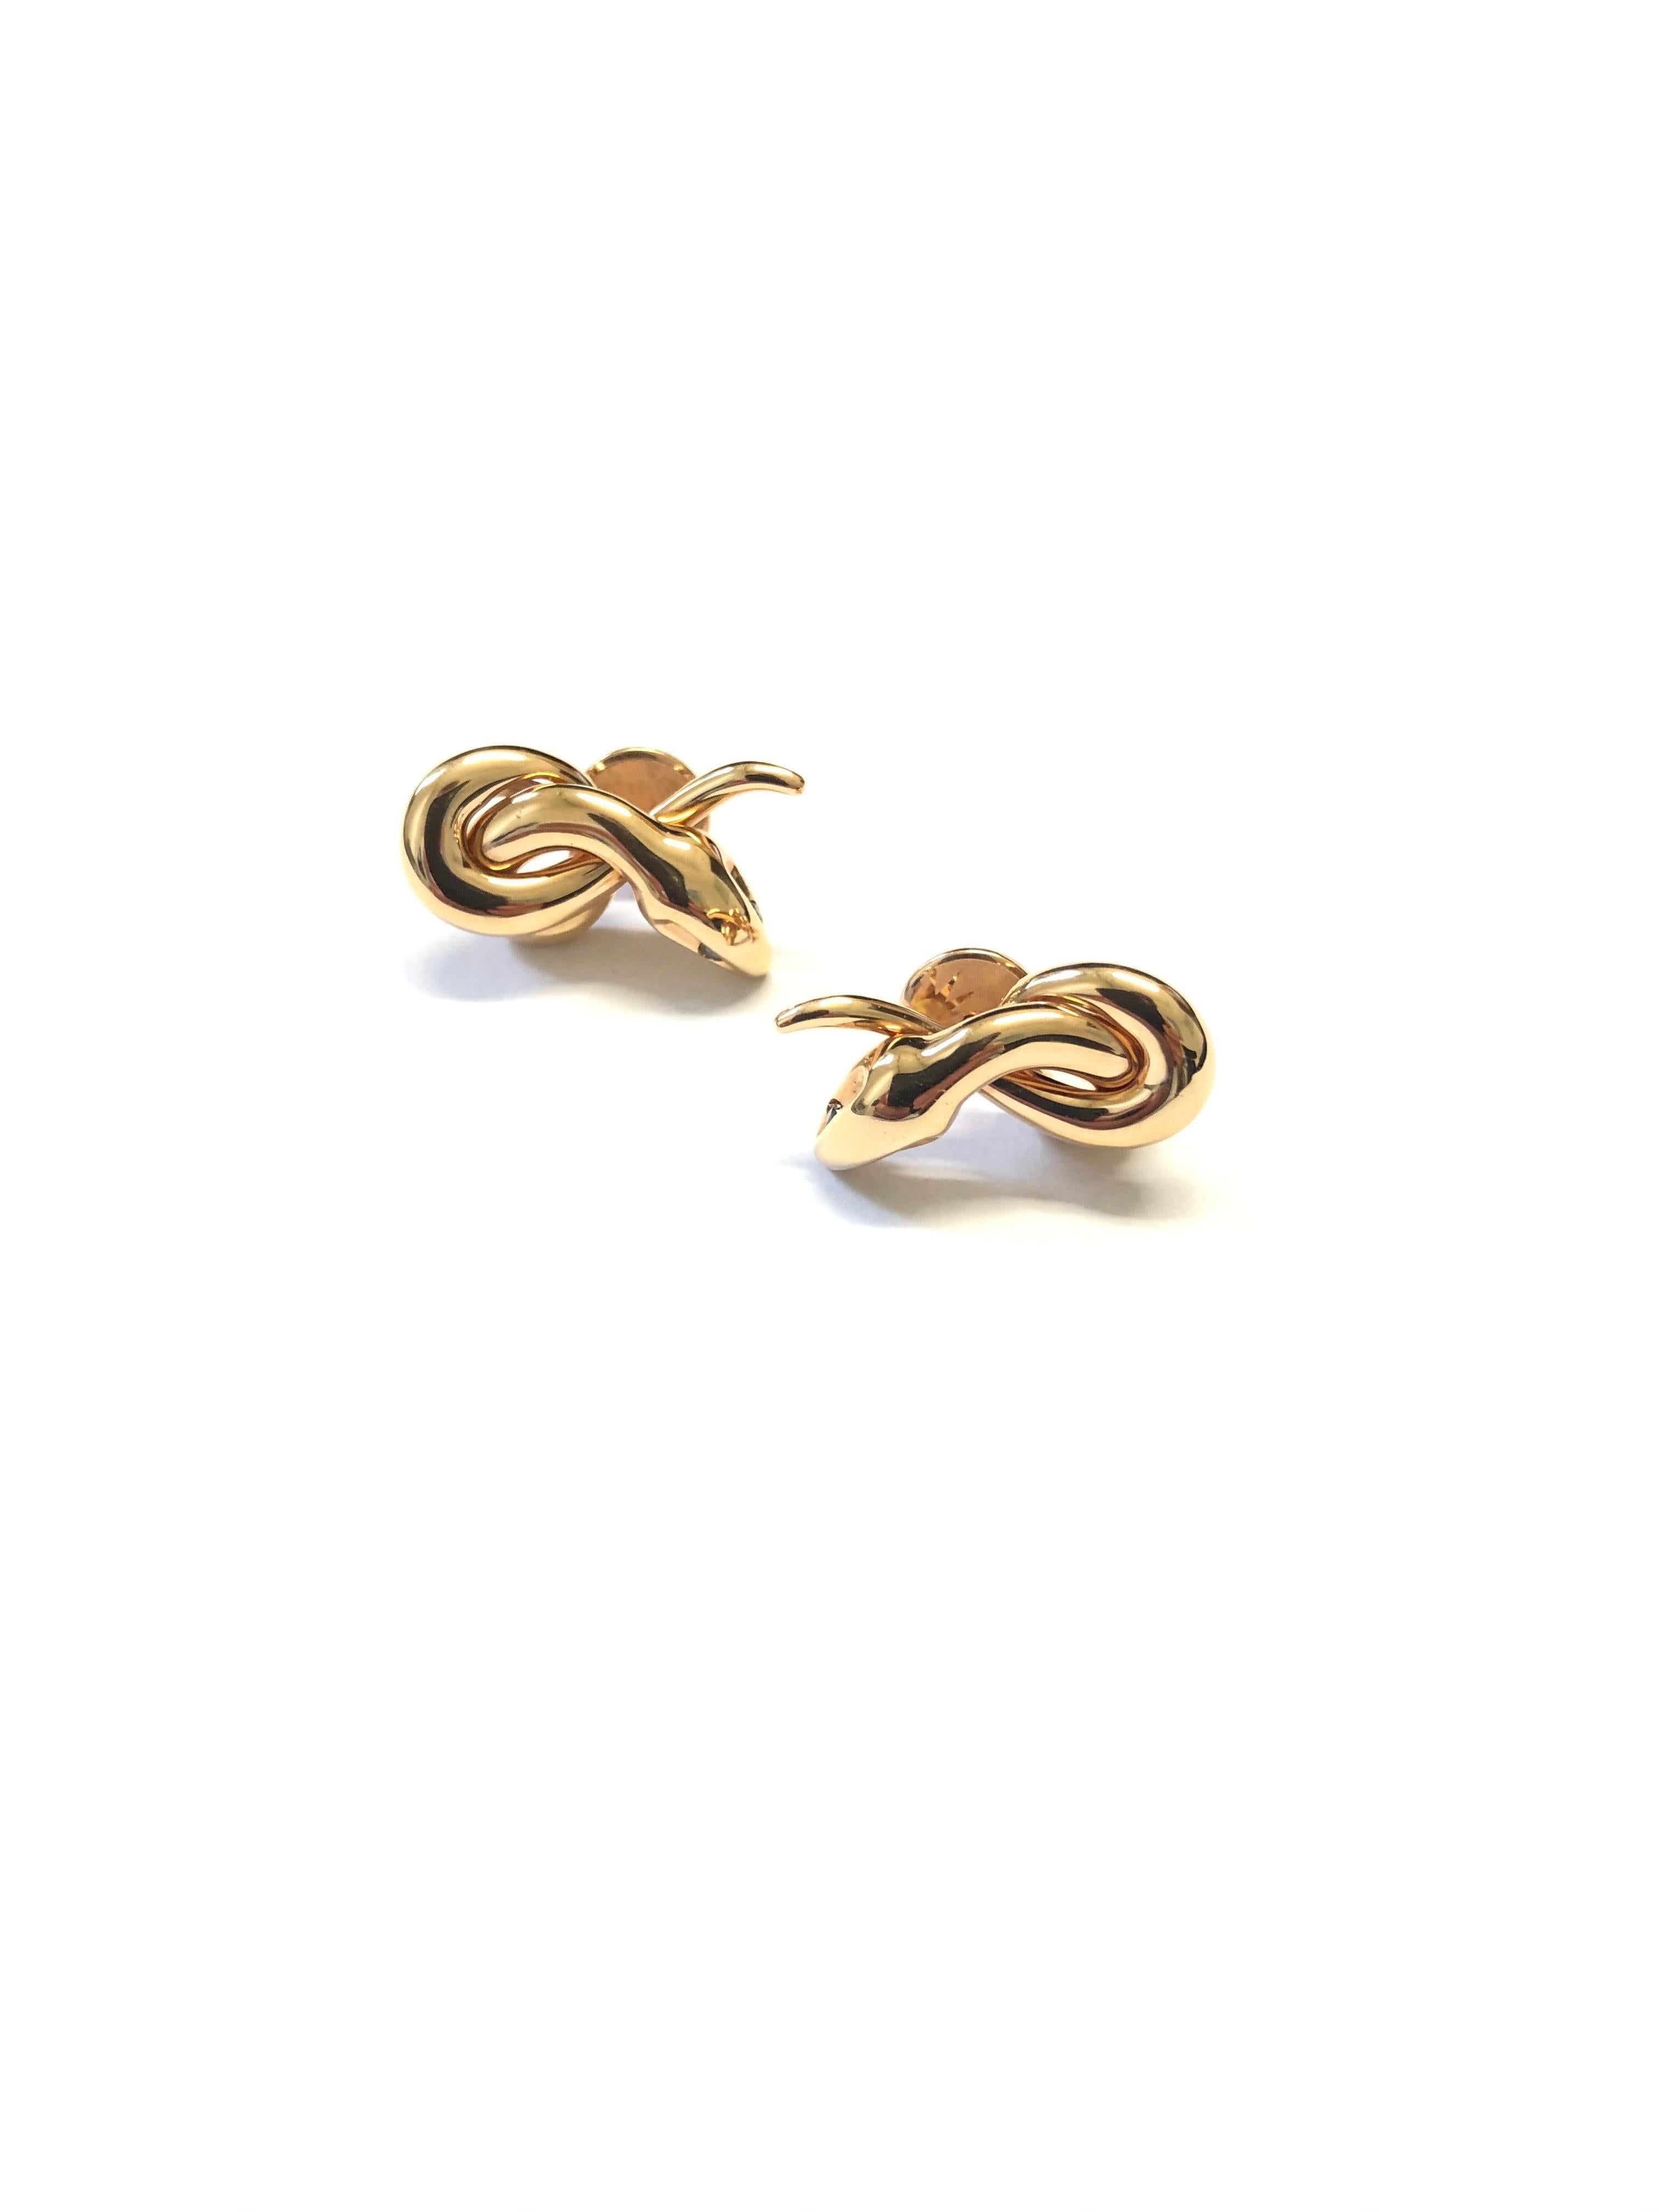 18 Carat Rose Gold Black Diamond Snake Stud Earrings featuring four black diamonds 0,06 carats, total piece weight 12,30 gr. Earring length 2 cm.
Handmade in Italy, in stock.
Each Luca Carati creation is delivered with its original box and